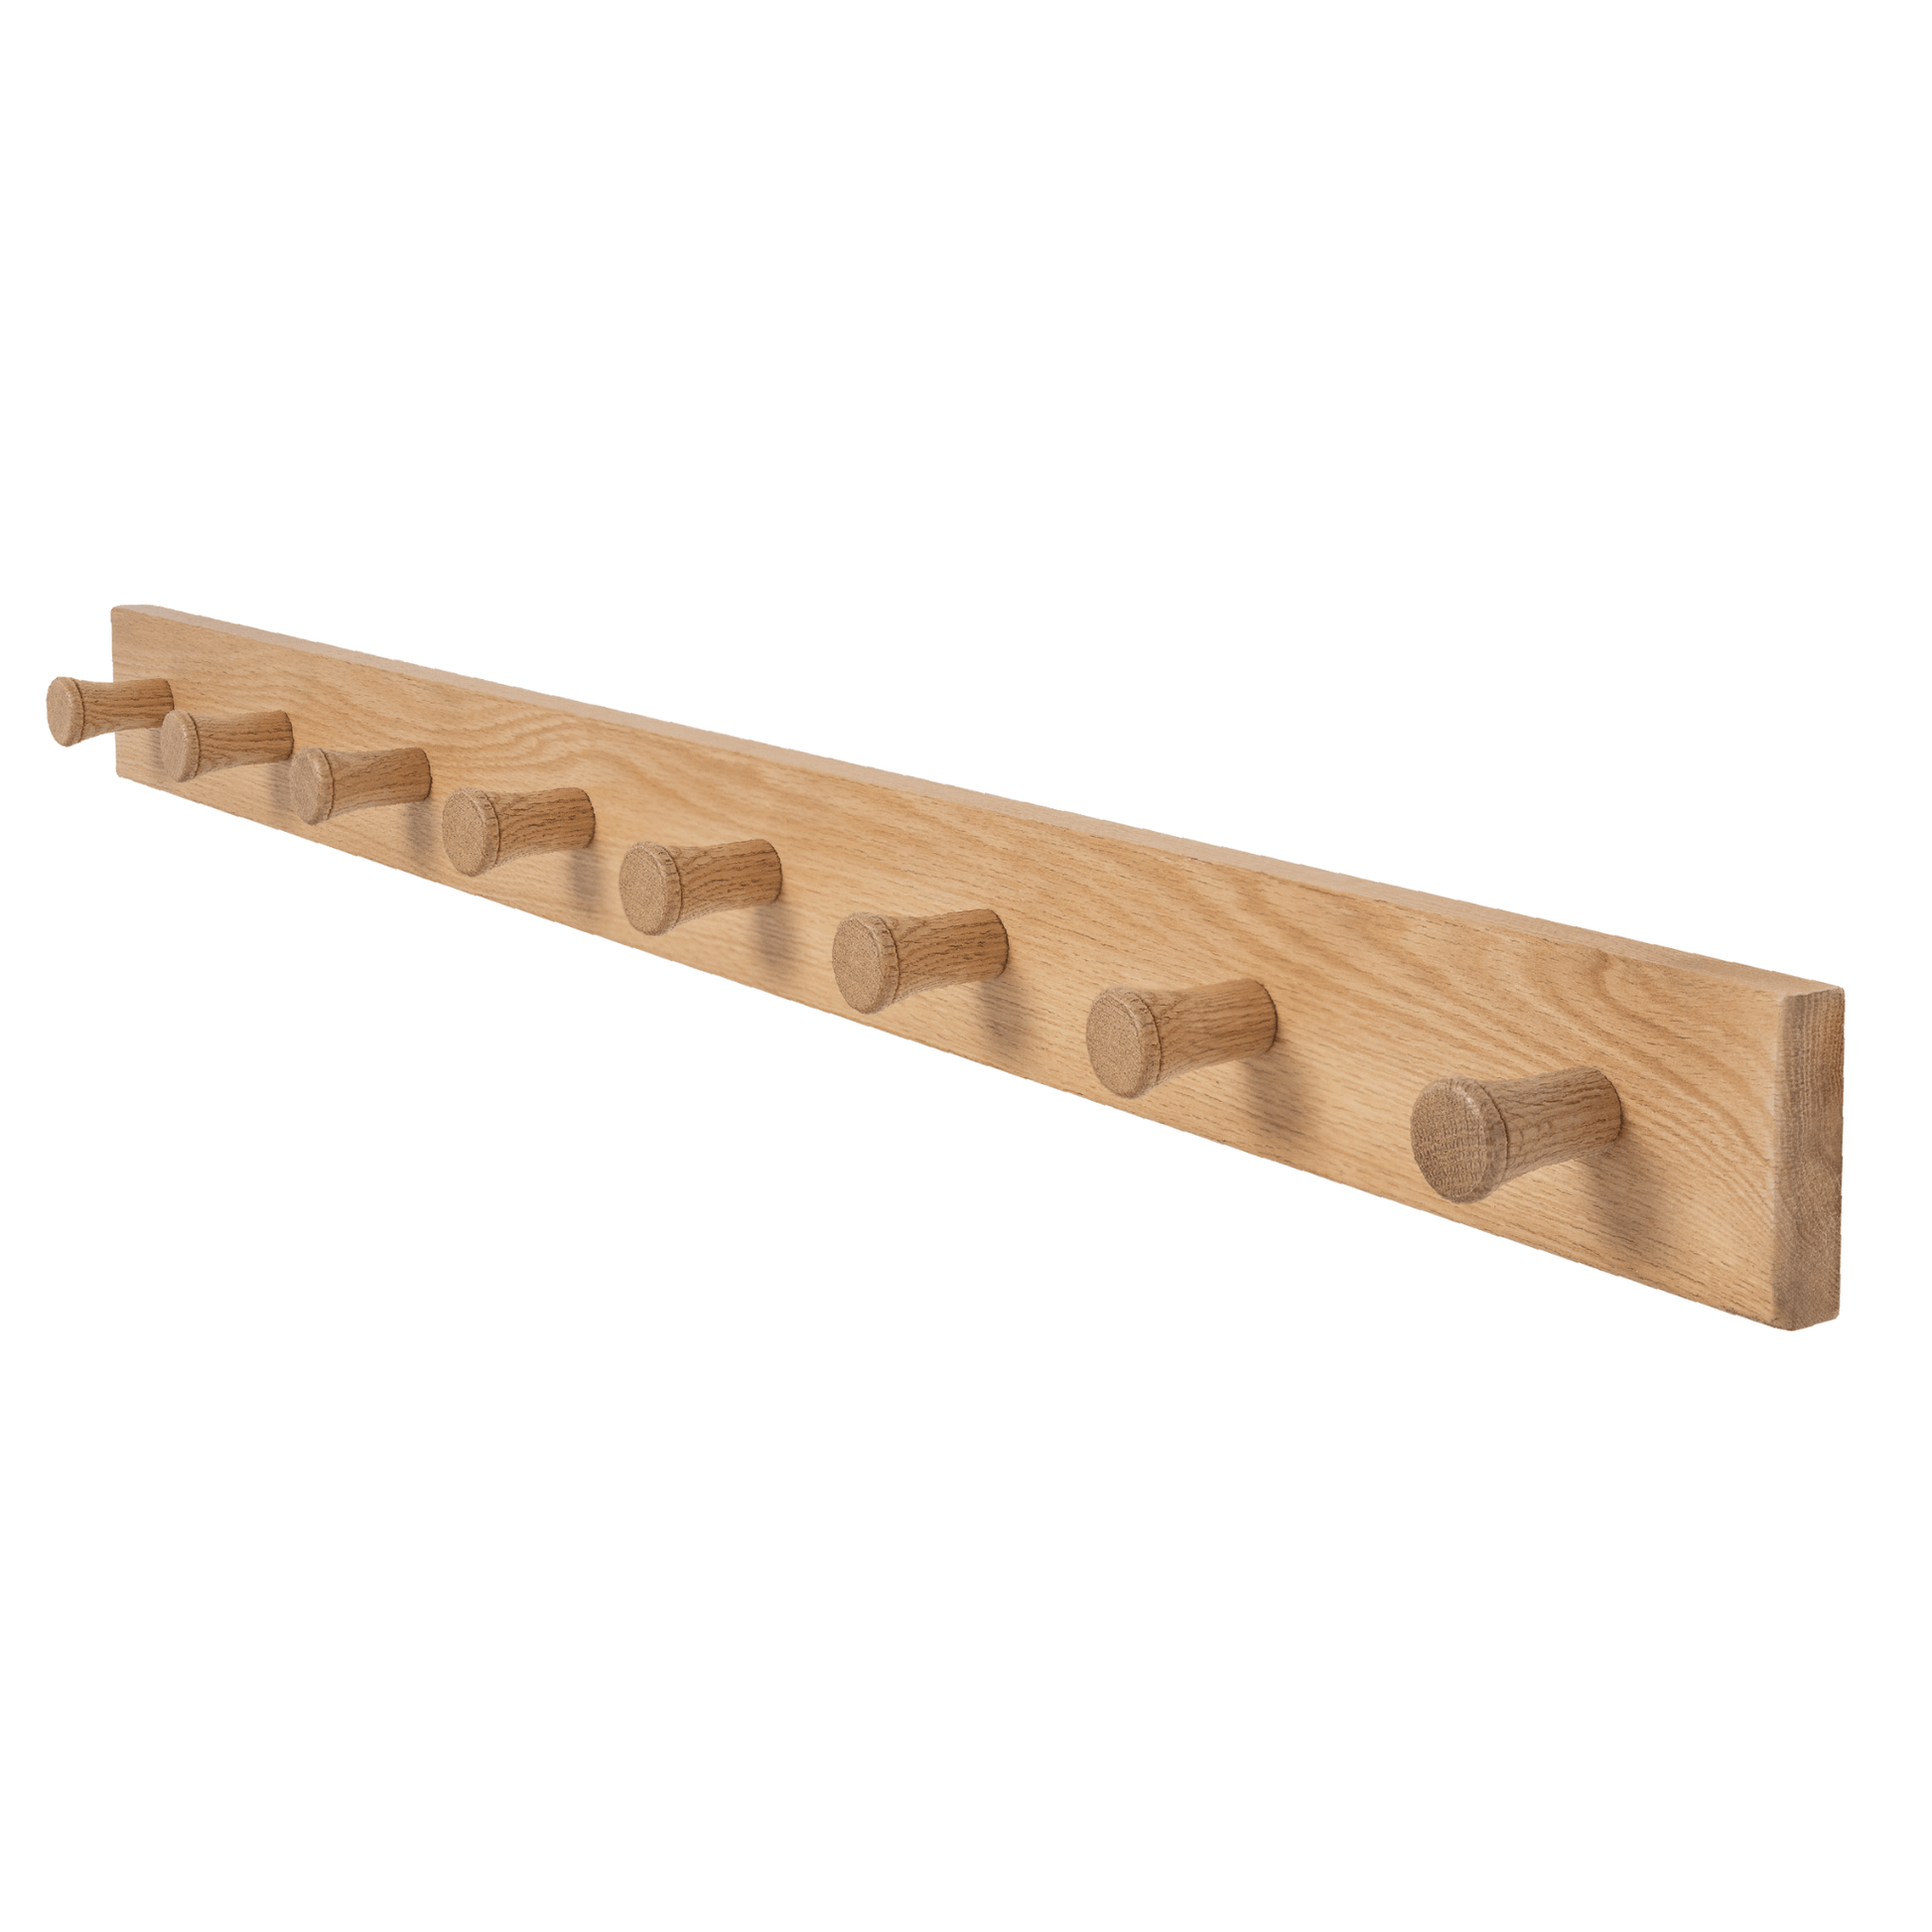 Wall Mounted Coat Hanger -Solid Oak - (8 Extra Thick Non Slip Pegs 108cm Long X 8.5cm Wide) - Hangersforless